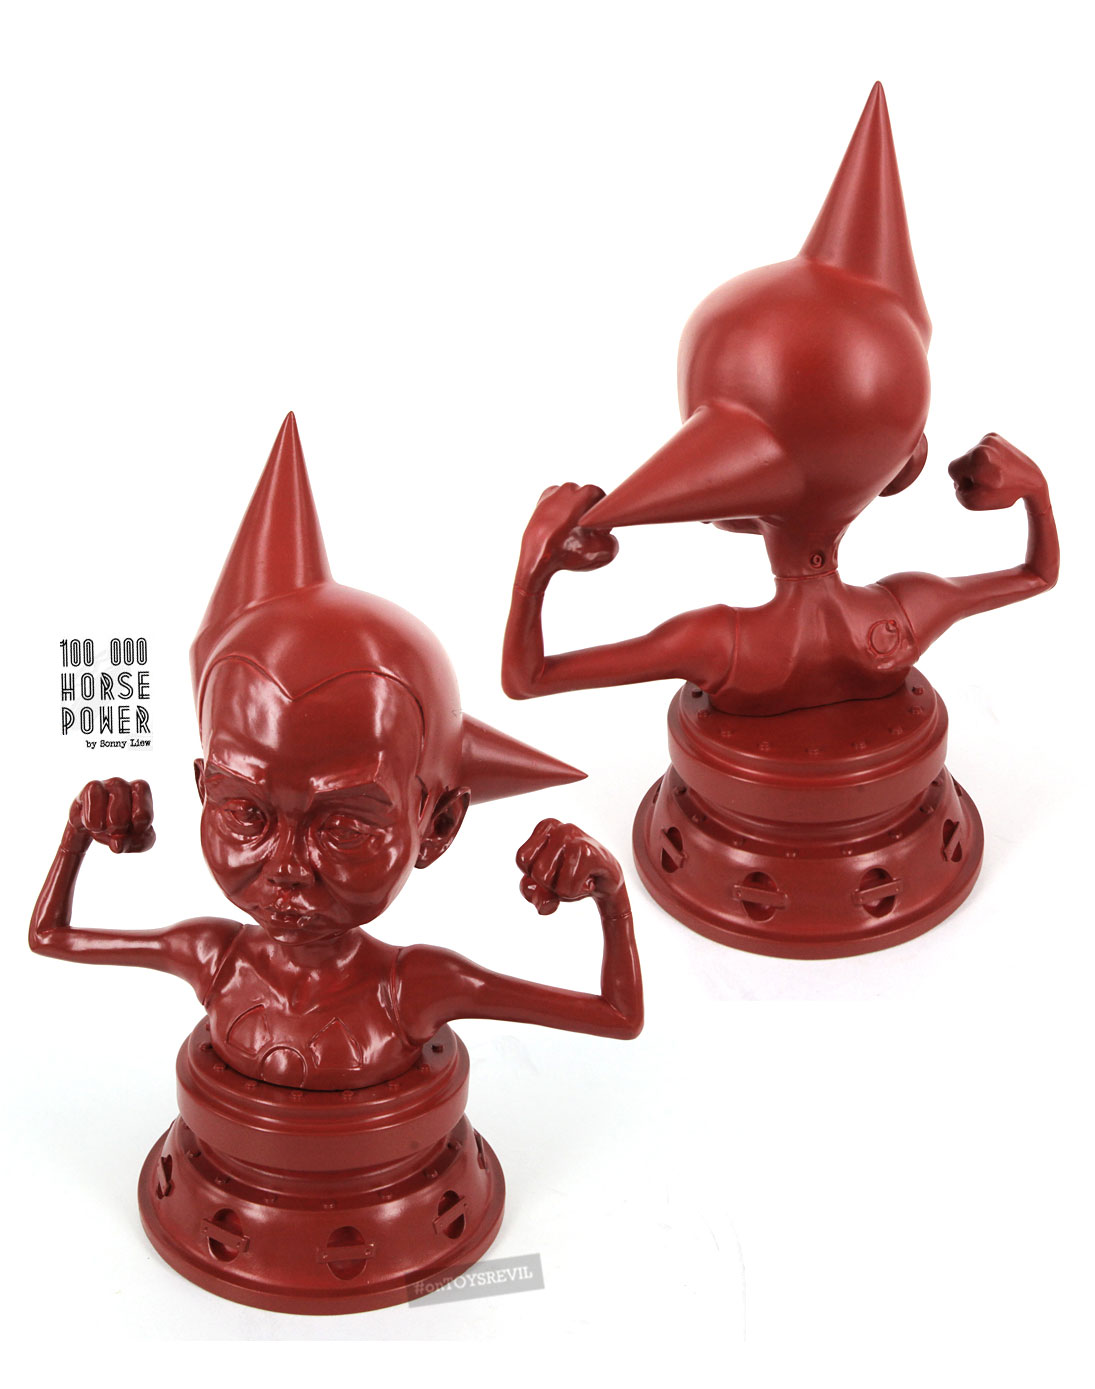 onTOYSREVIL: Triangle Blame 1/6-figure from Coo Models